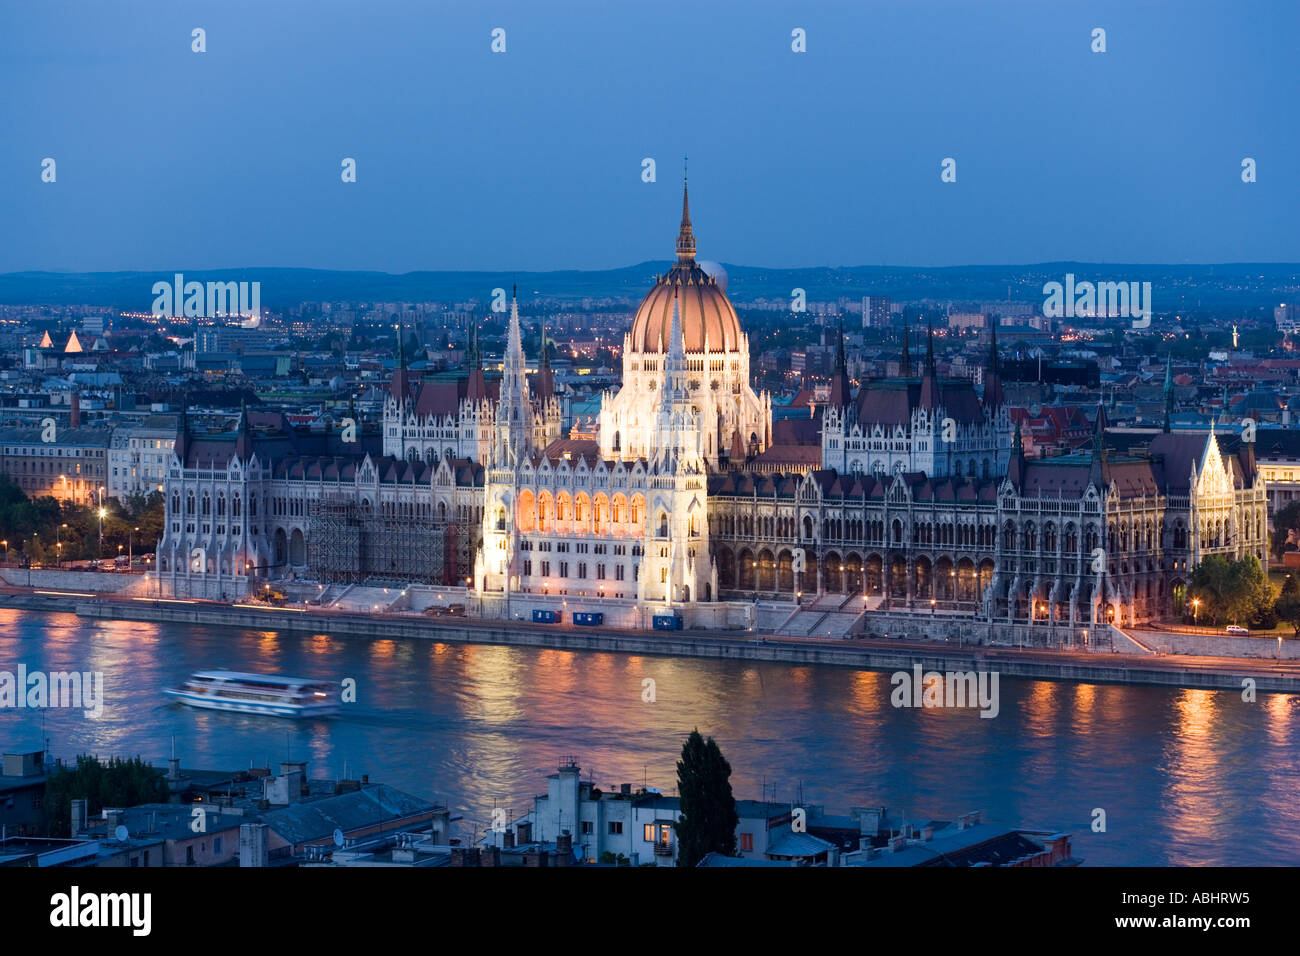 View over the Danube river to the illuminated Parliament in the evening Pest Budapest Hungary Stock Photo